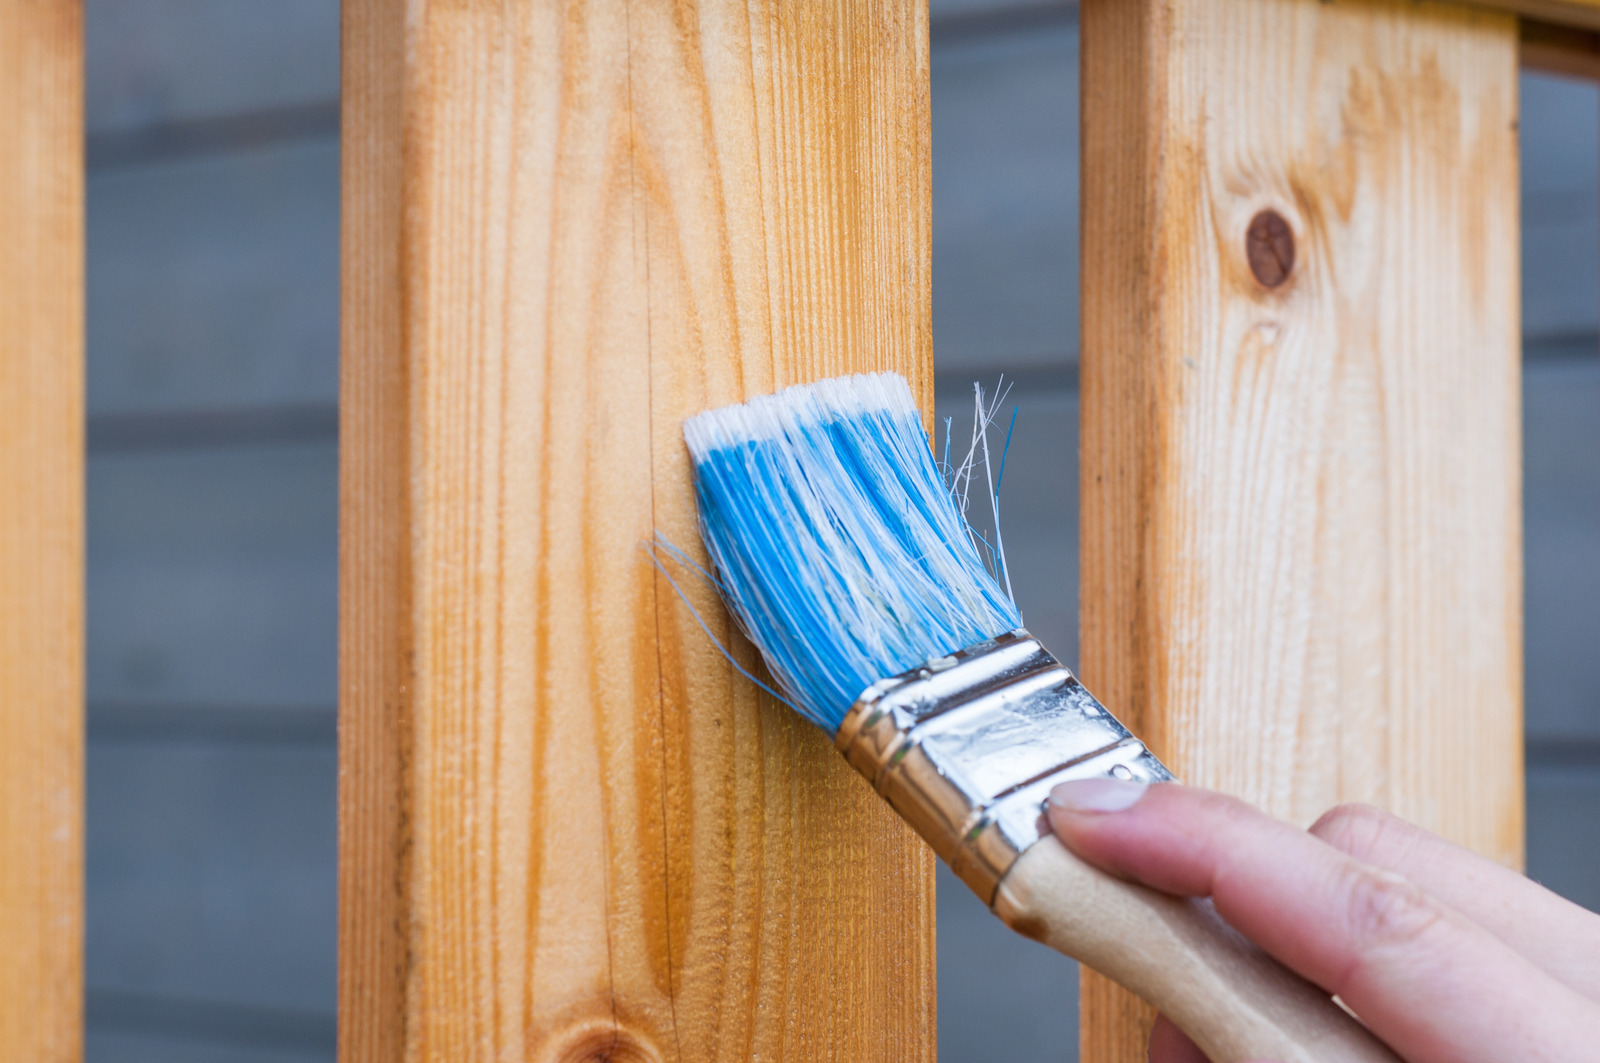 common summer home remodeling projects